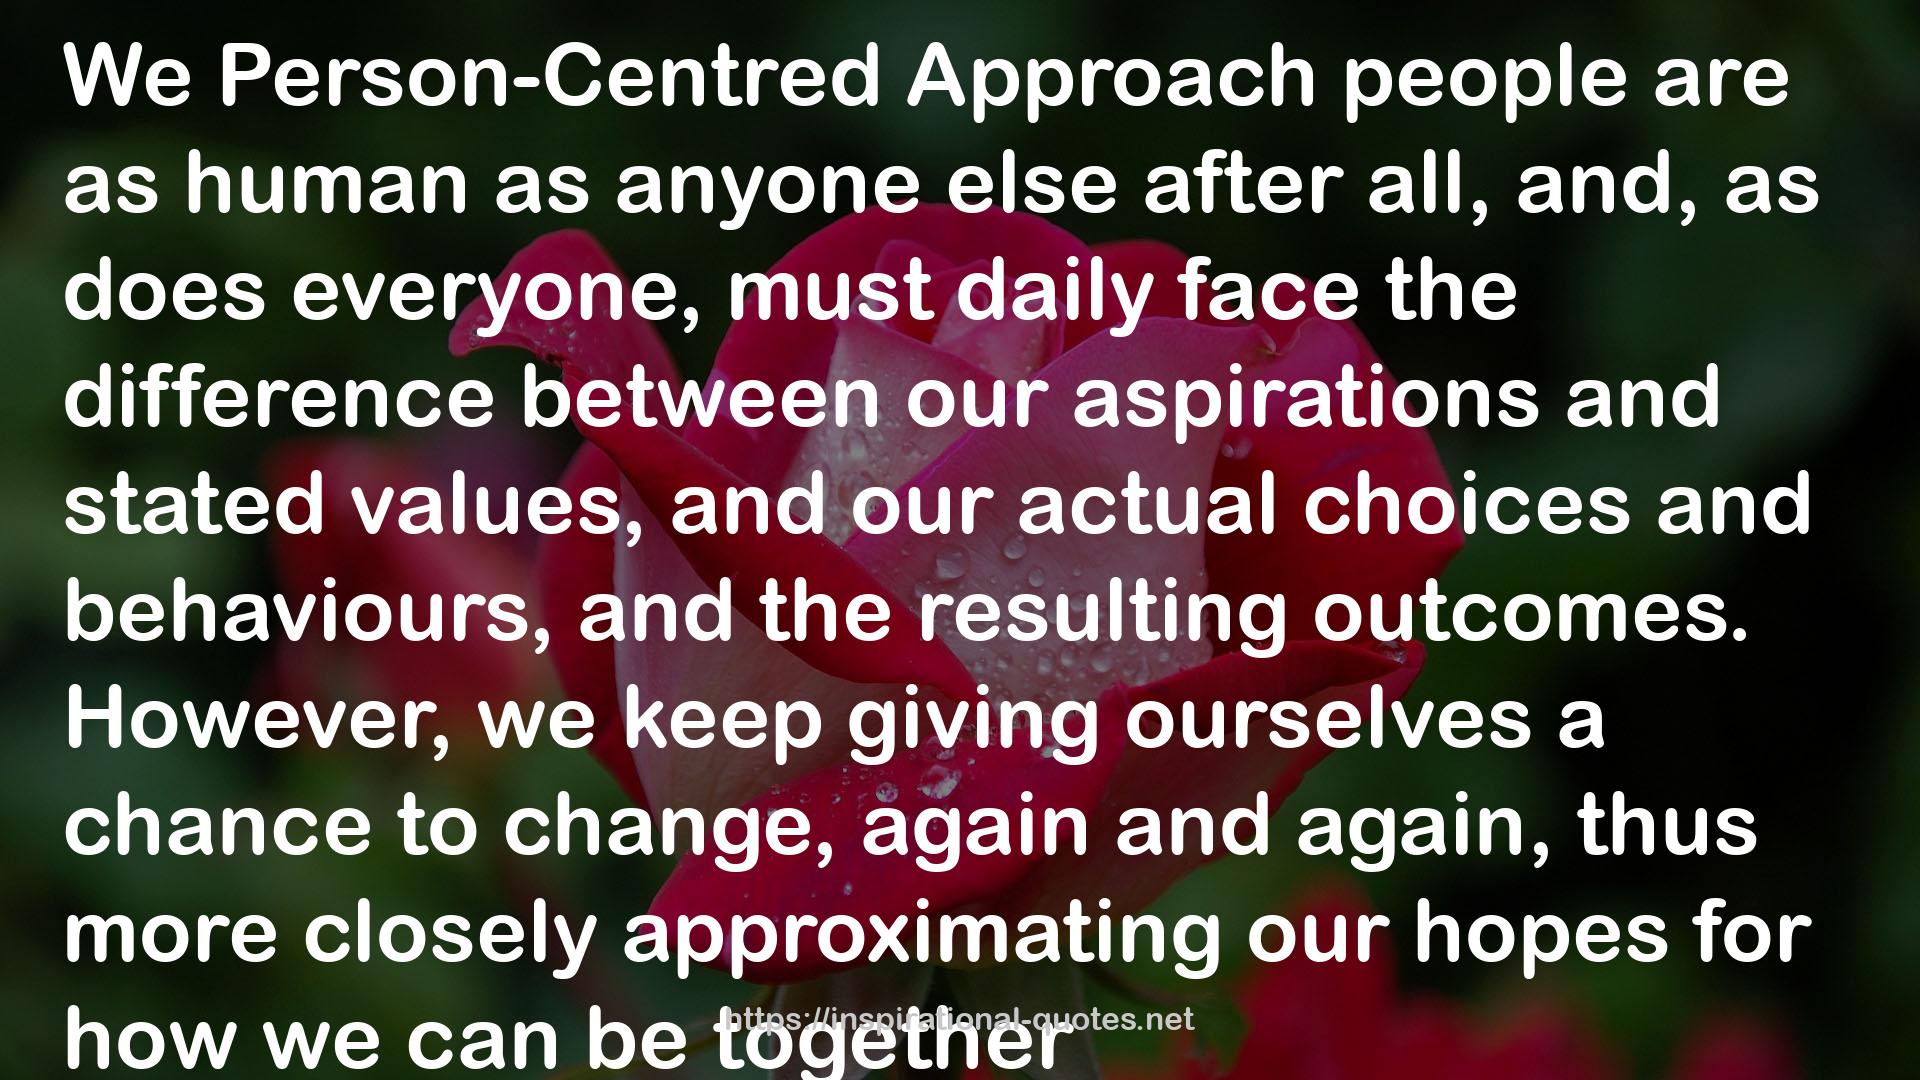 Politicizing the Person-Centred Approach: An Agenda for Social Change QUOTES